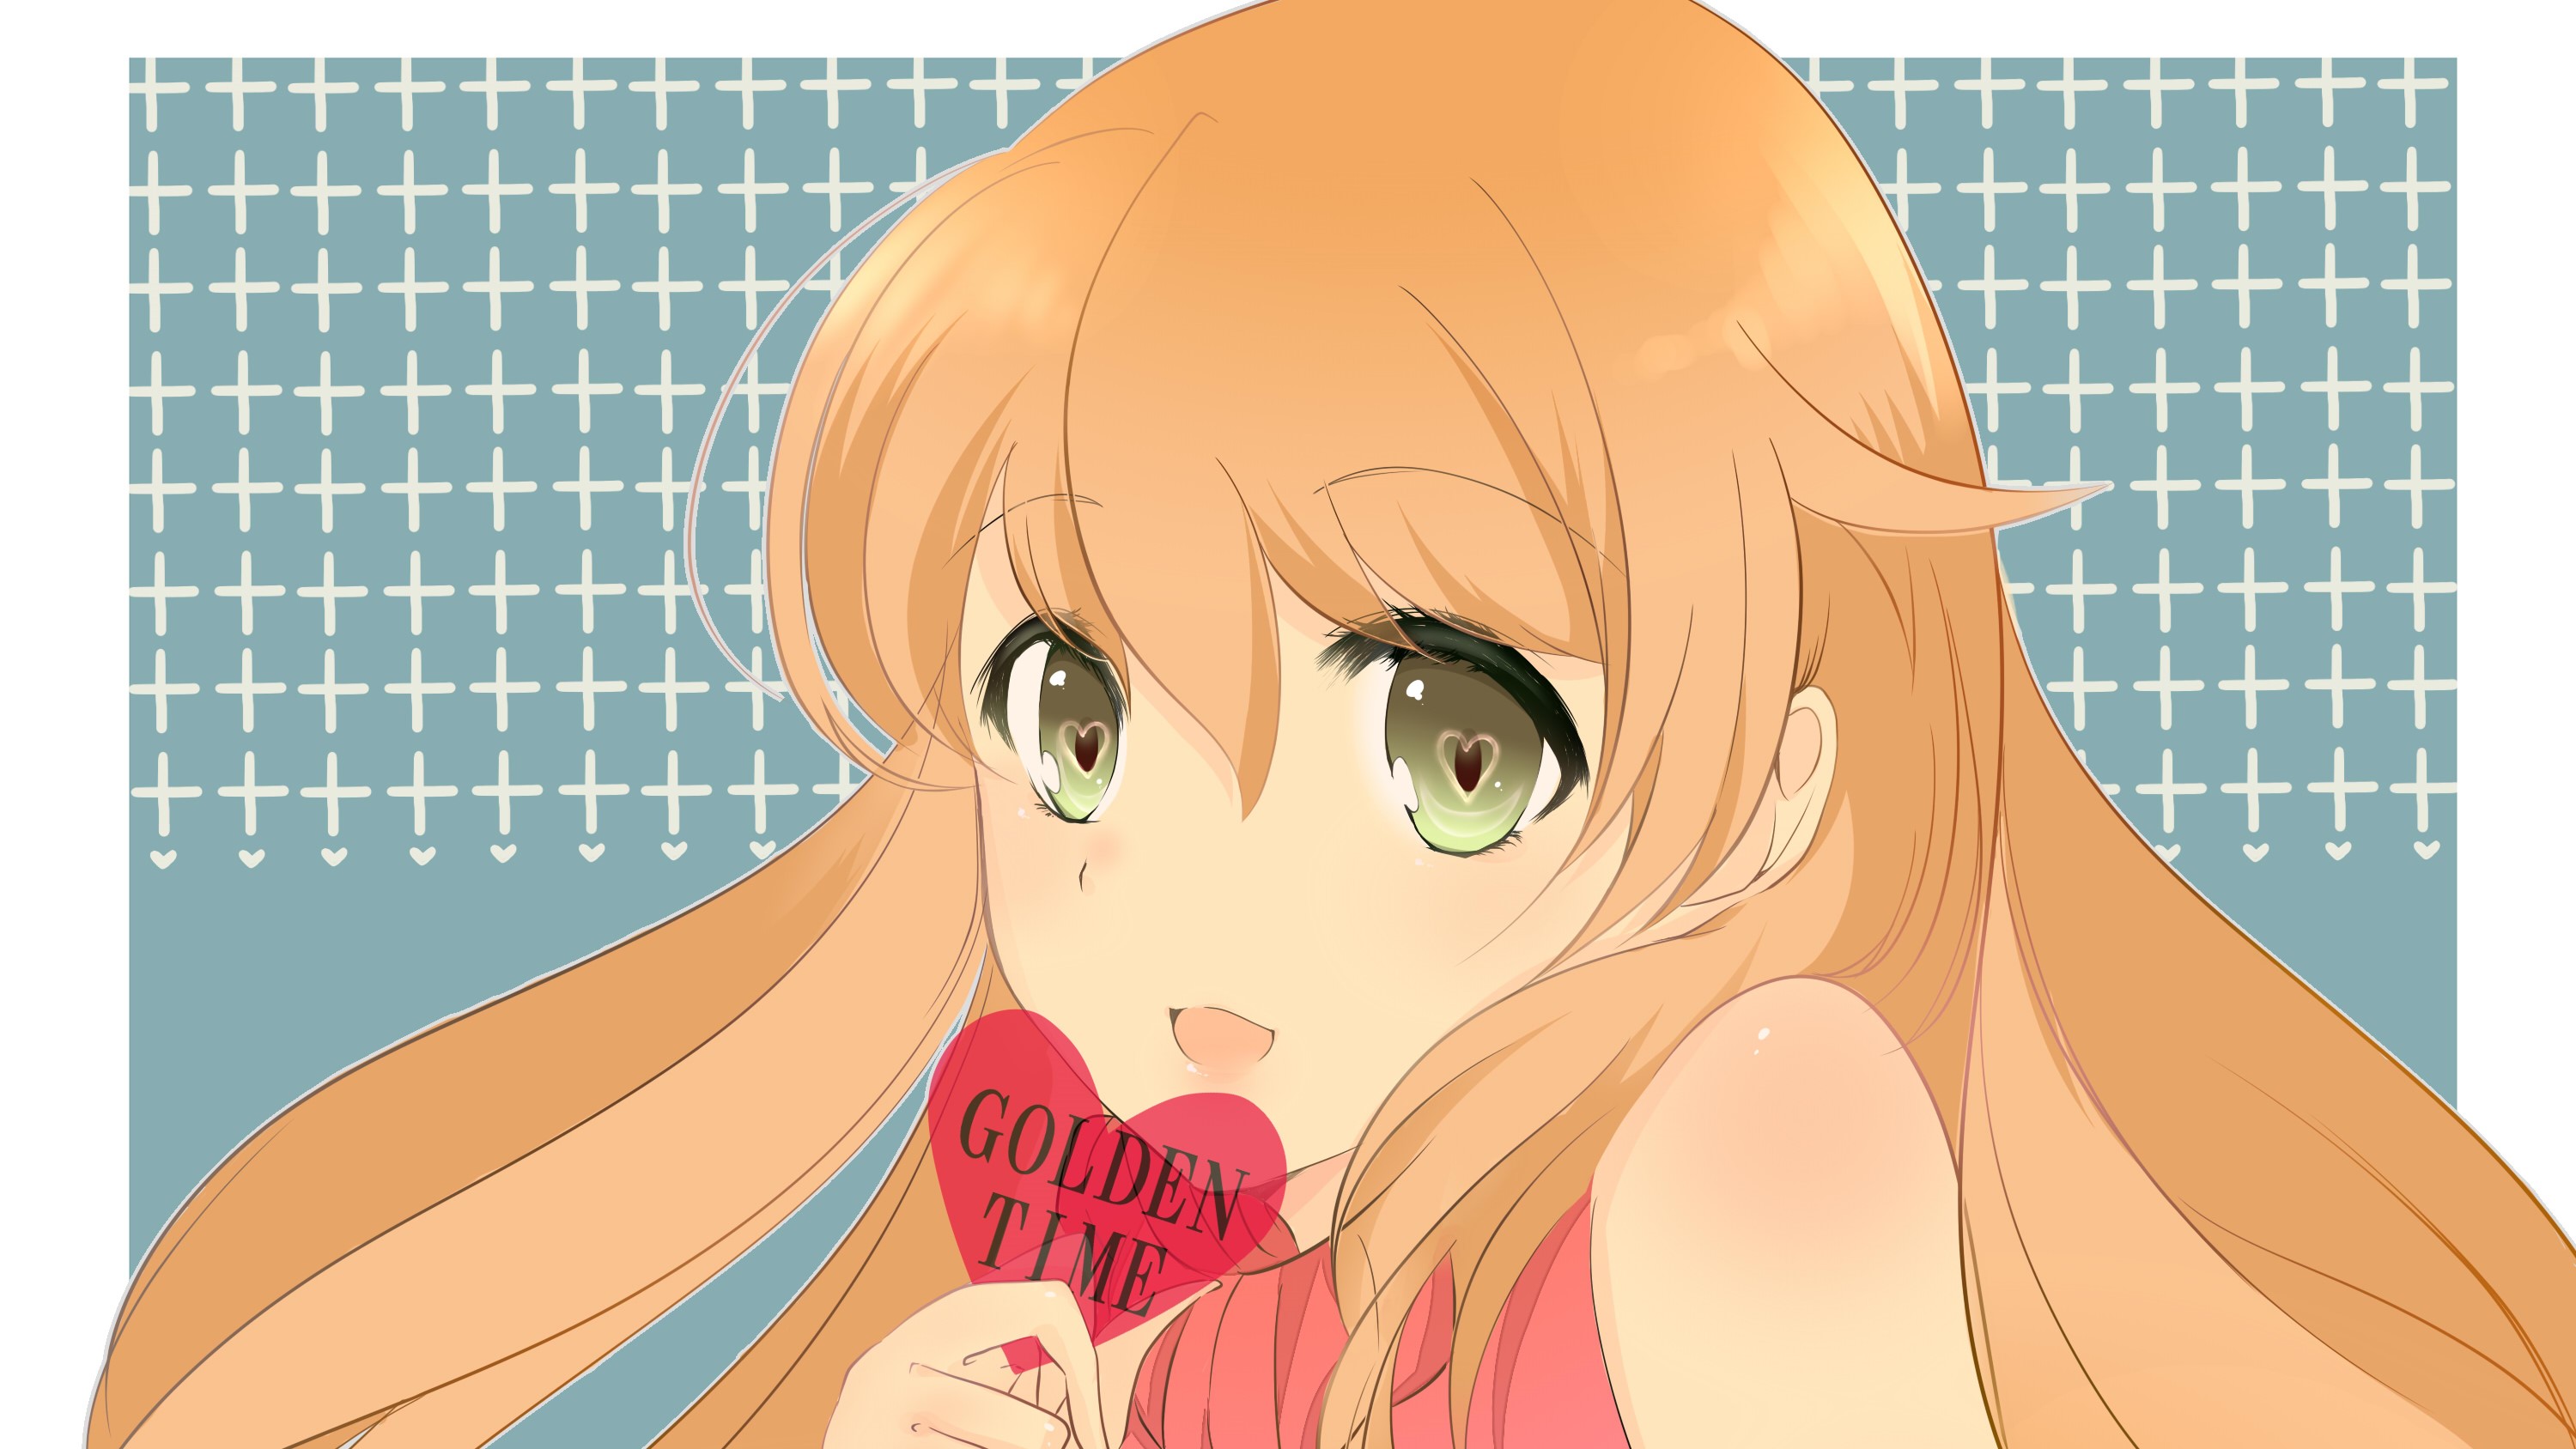 Anime Golden Time HD Wallpaper by なるみや